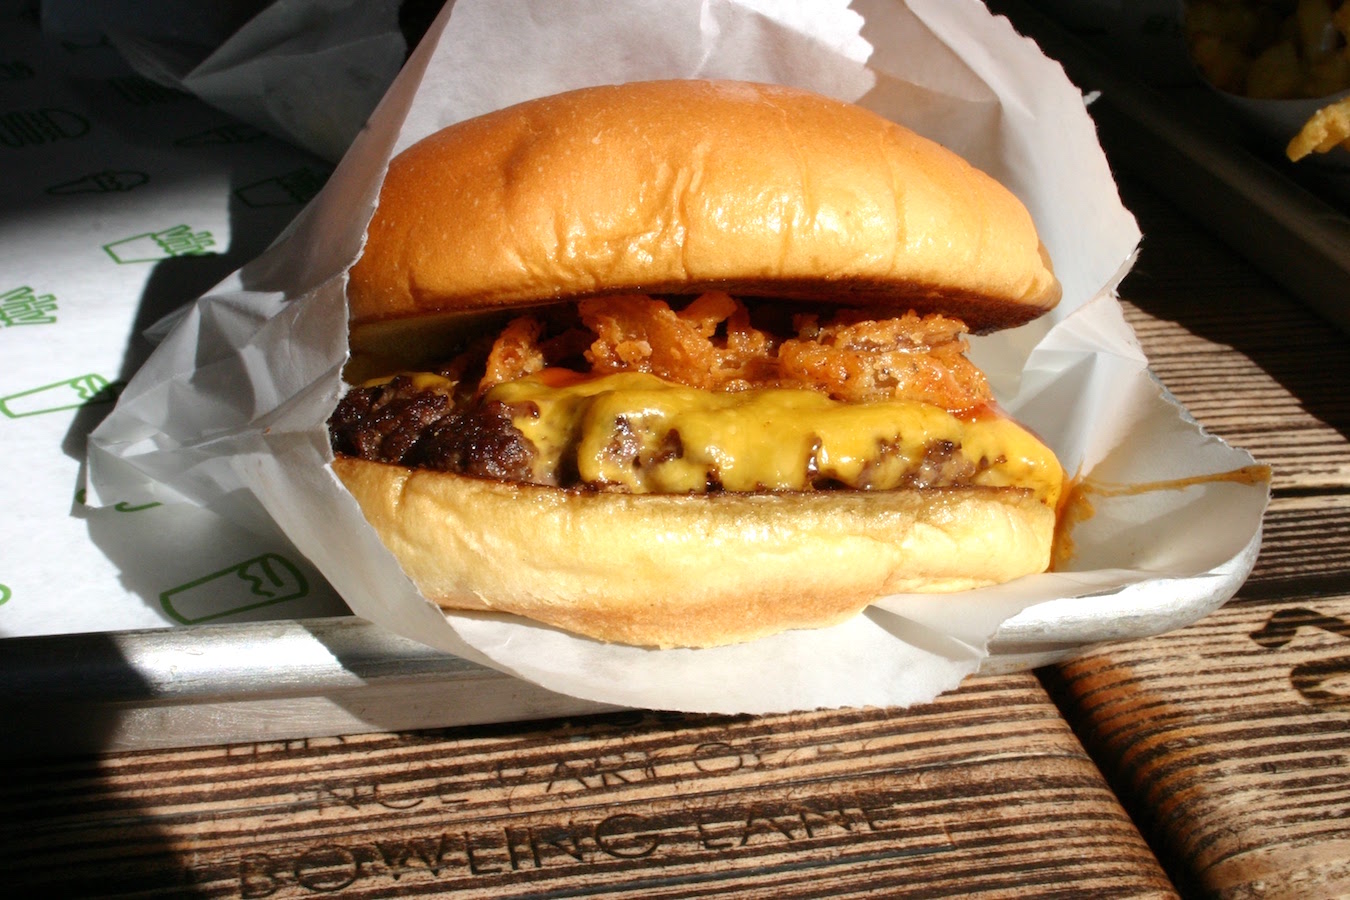 The+BBQ+ShackMeister+Burger+at+Shake+Shack+is+one+of+the+menu+items+featured+for+a+limited+time.